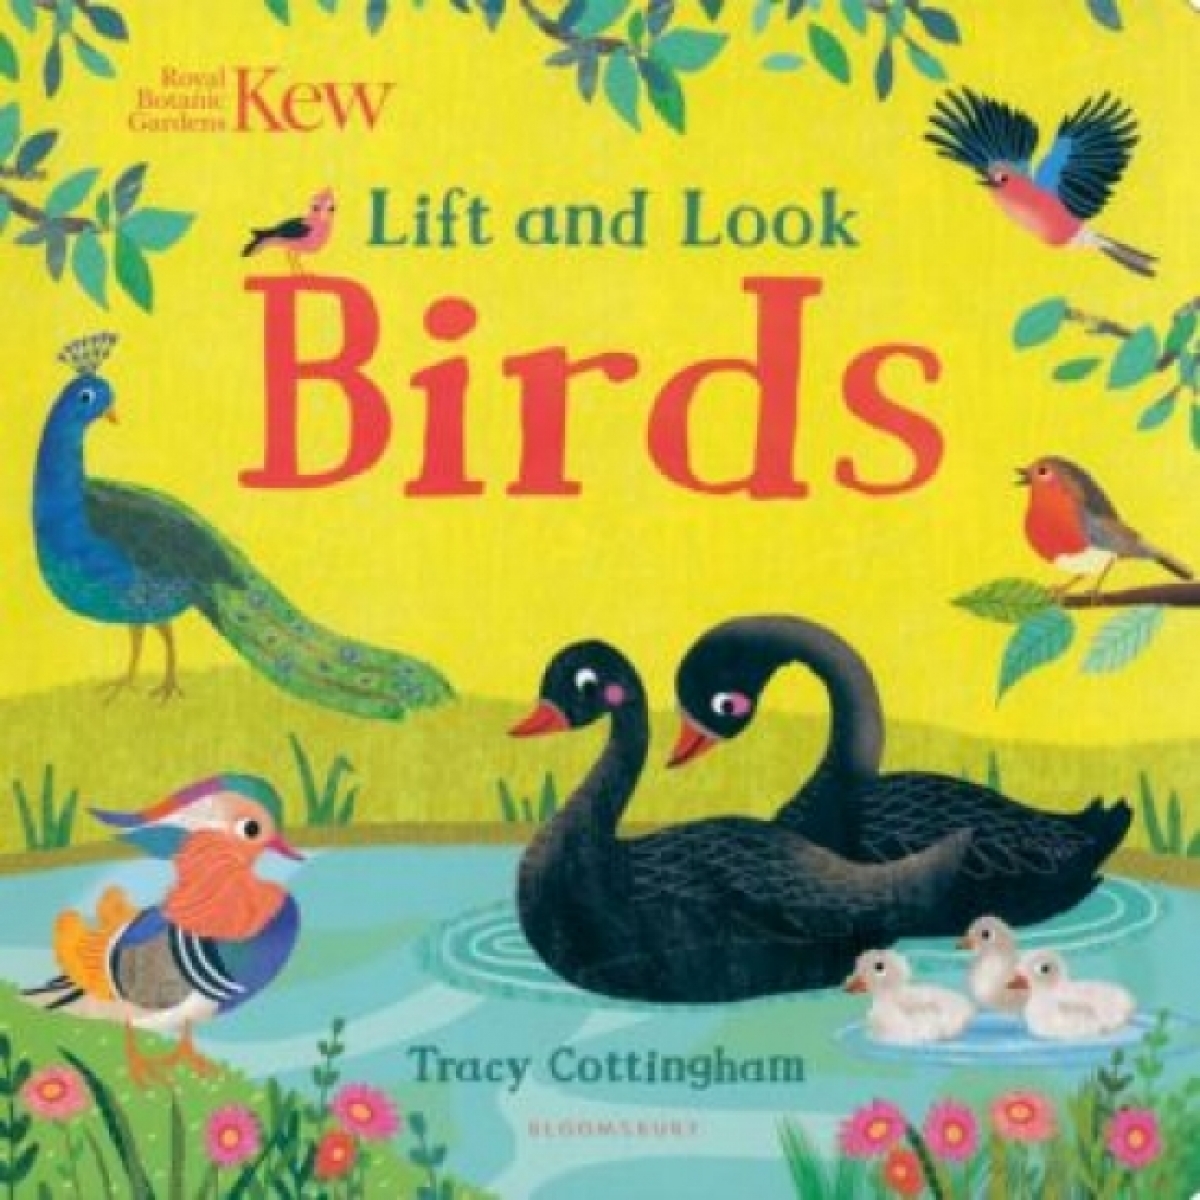 Cottingham Tracy Kew. Lift and Look Birds 